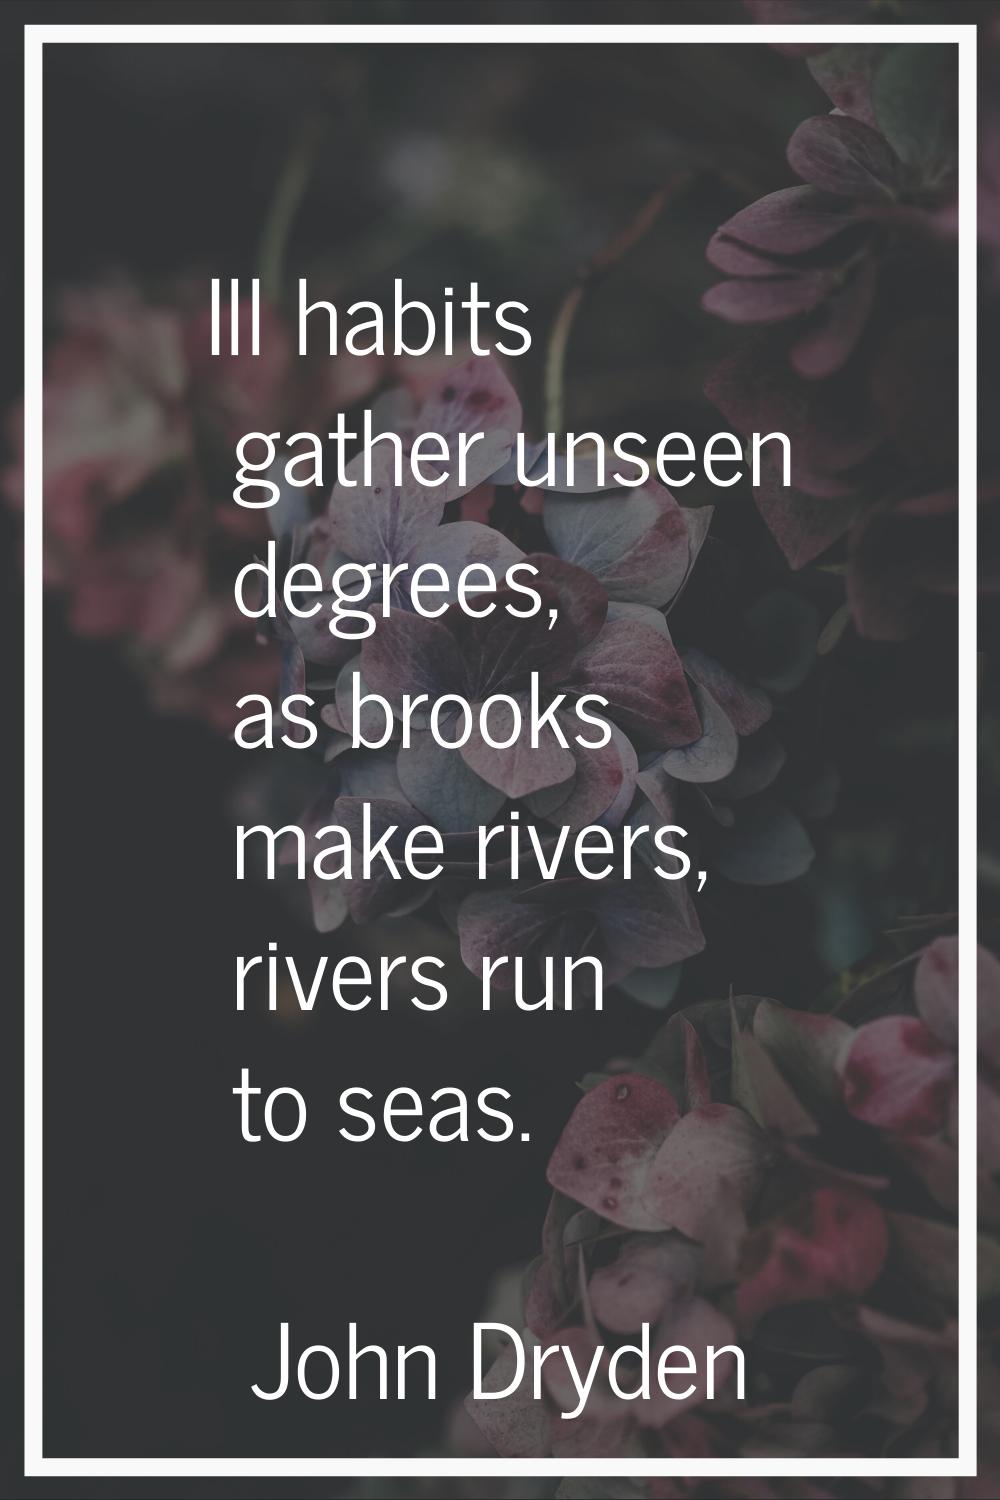 Ill habits gather unseen degrees, as brooks make rivers, rivers run to seas.